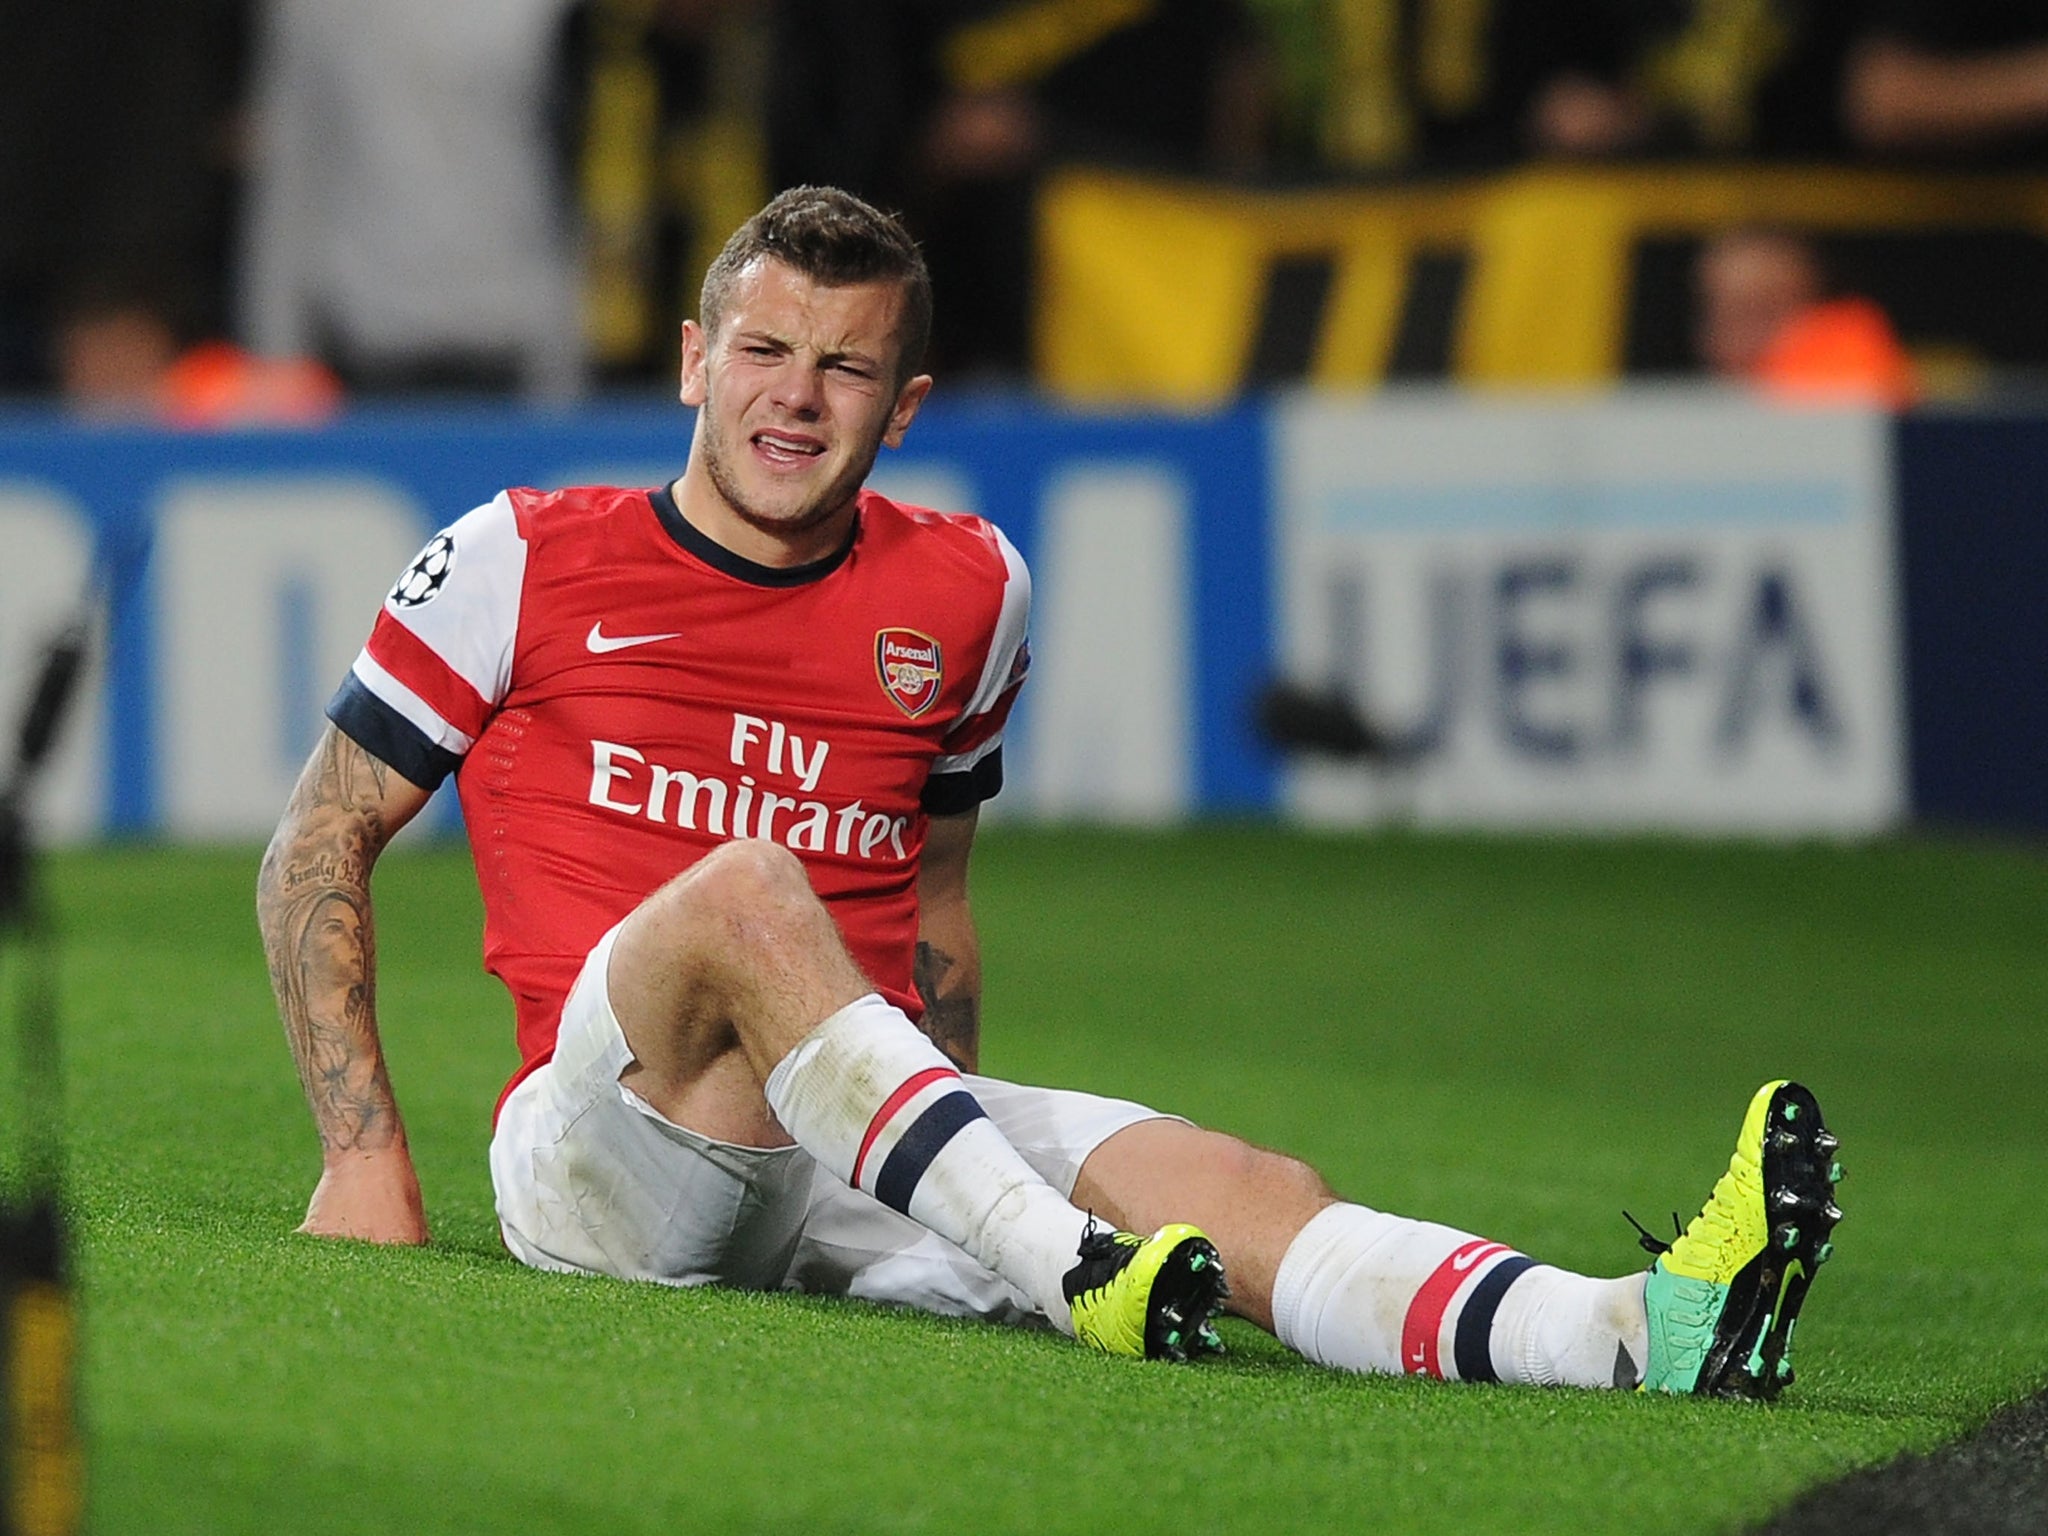 Jack Wilshere will be monitored by Arsene Wenger ahead of Arsenal's trip to Crystal Palace